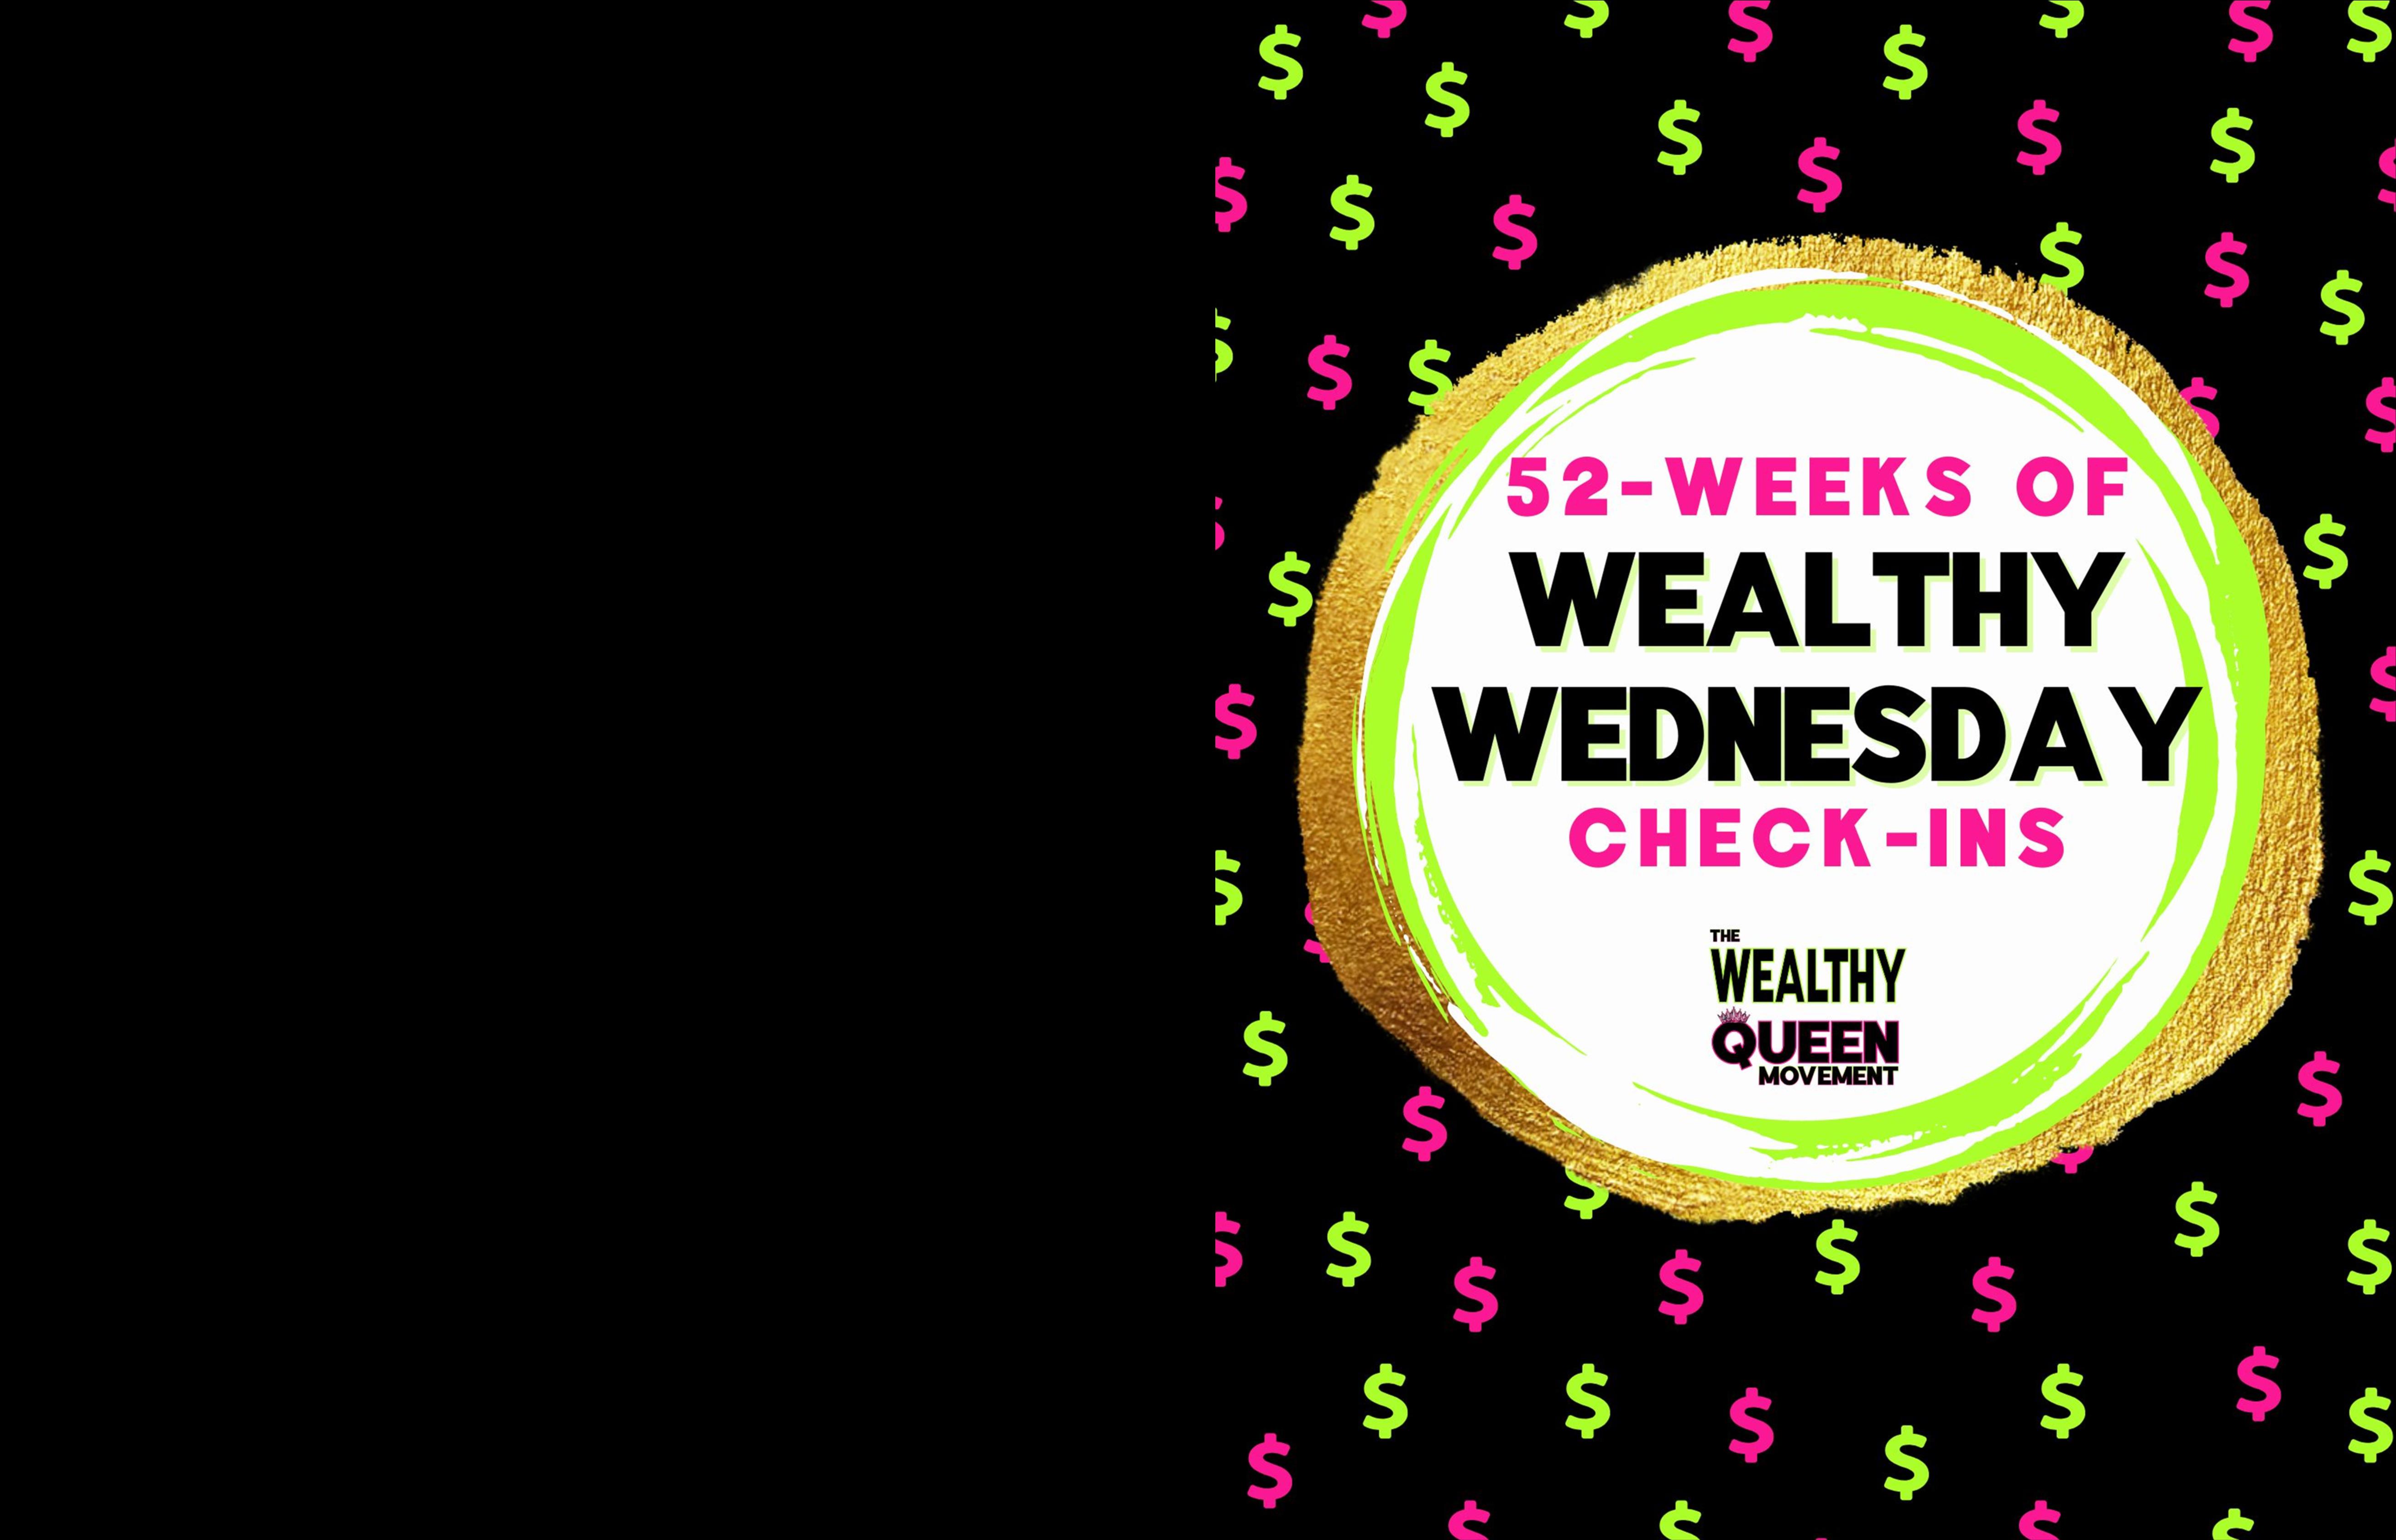 52-Weeks of Wealthy Wednesday Check-ins cover image